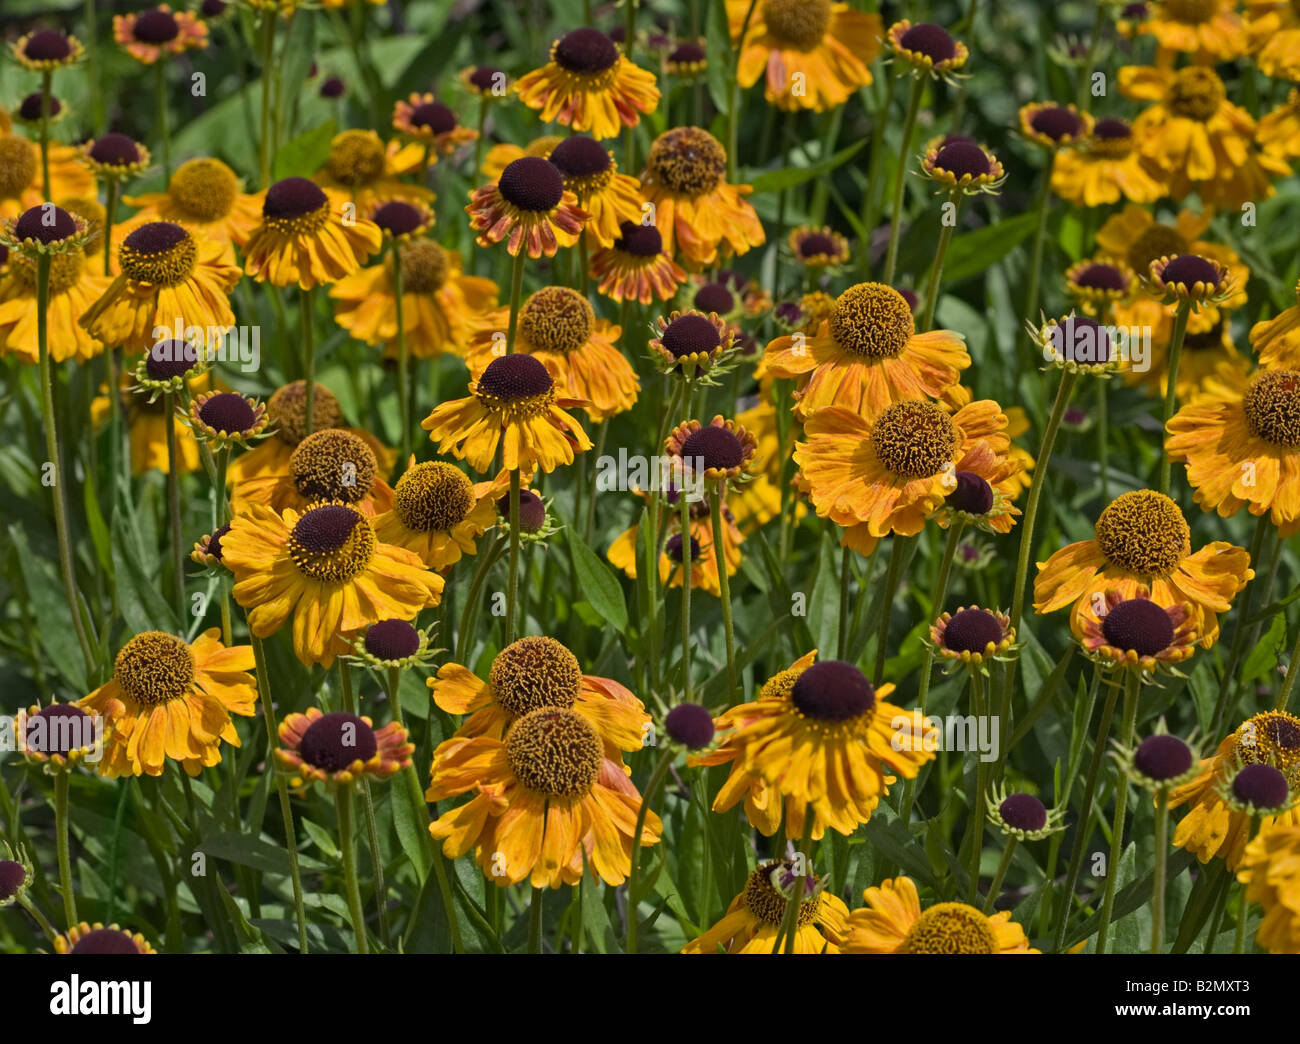 Sea of Yellow Helenium Wyndley flowers (also known as Helen's Flower or Blanket Flower) Stock Photo